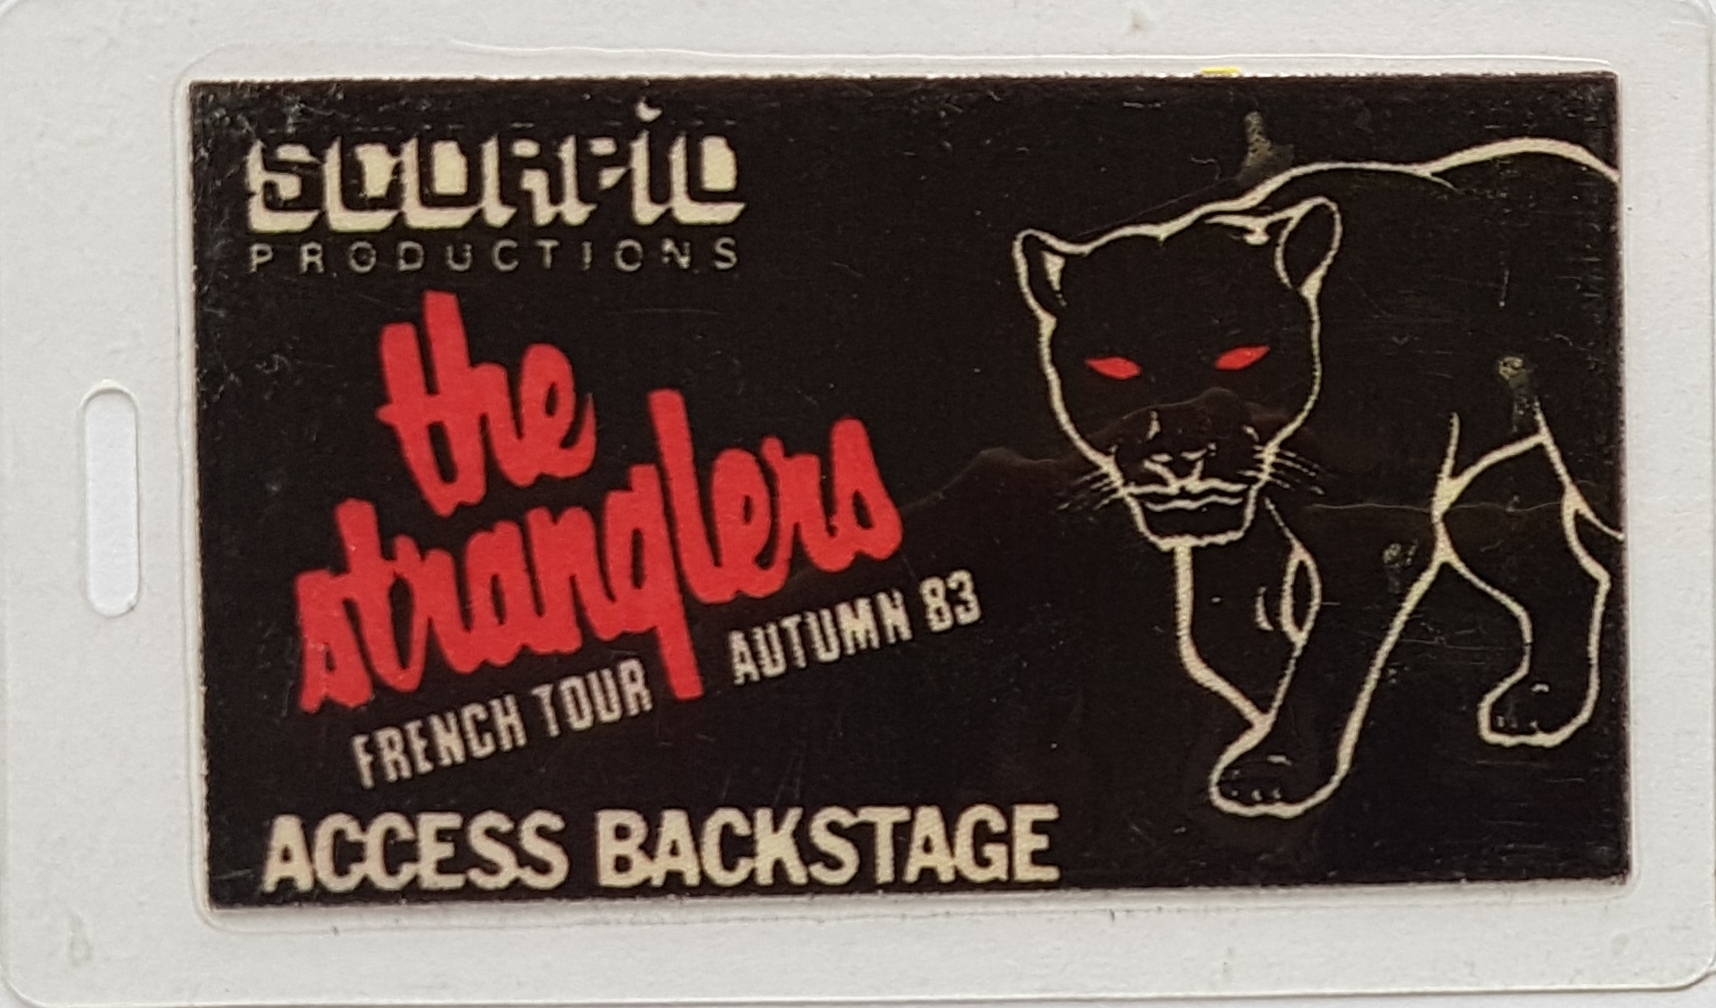 Picture of TS-BSP Back stage pass - French tour by artist The Stranglers from The Stranglers anything_else